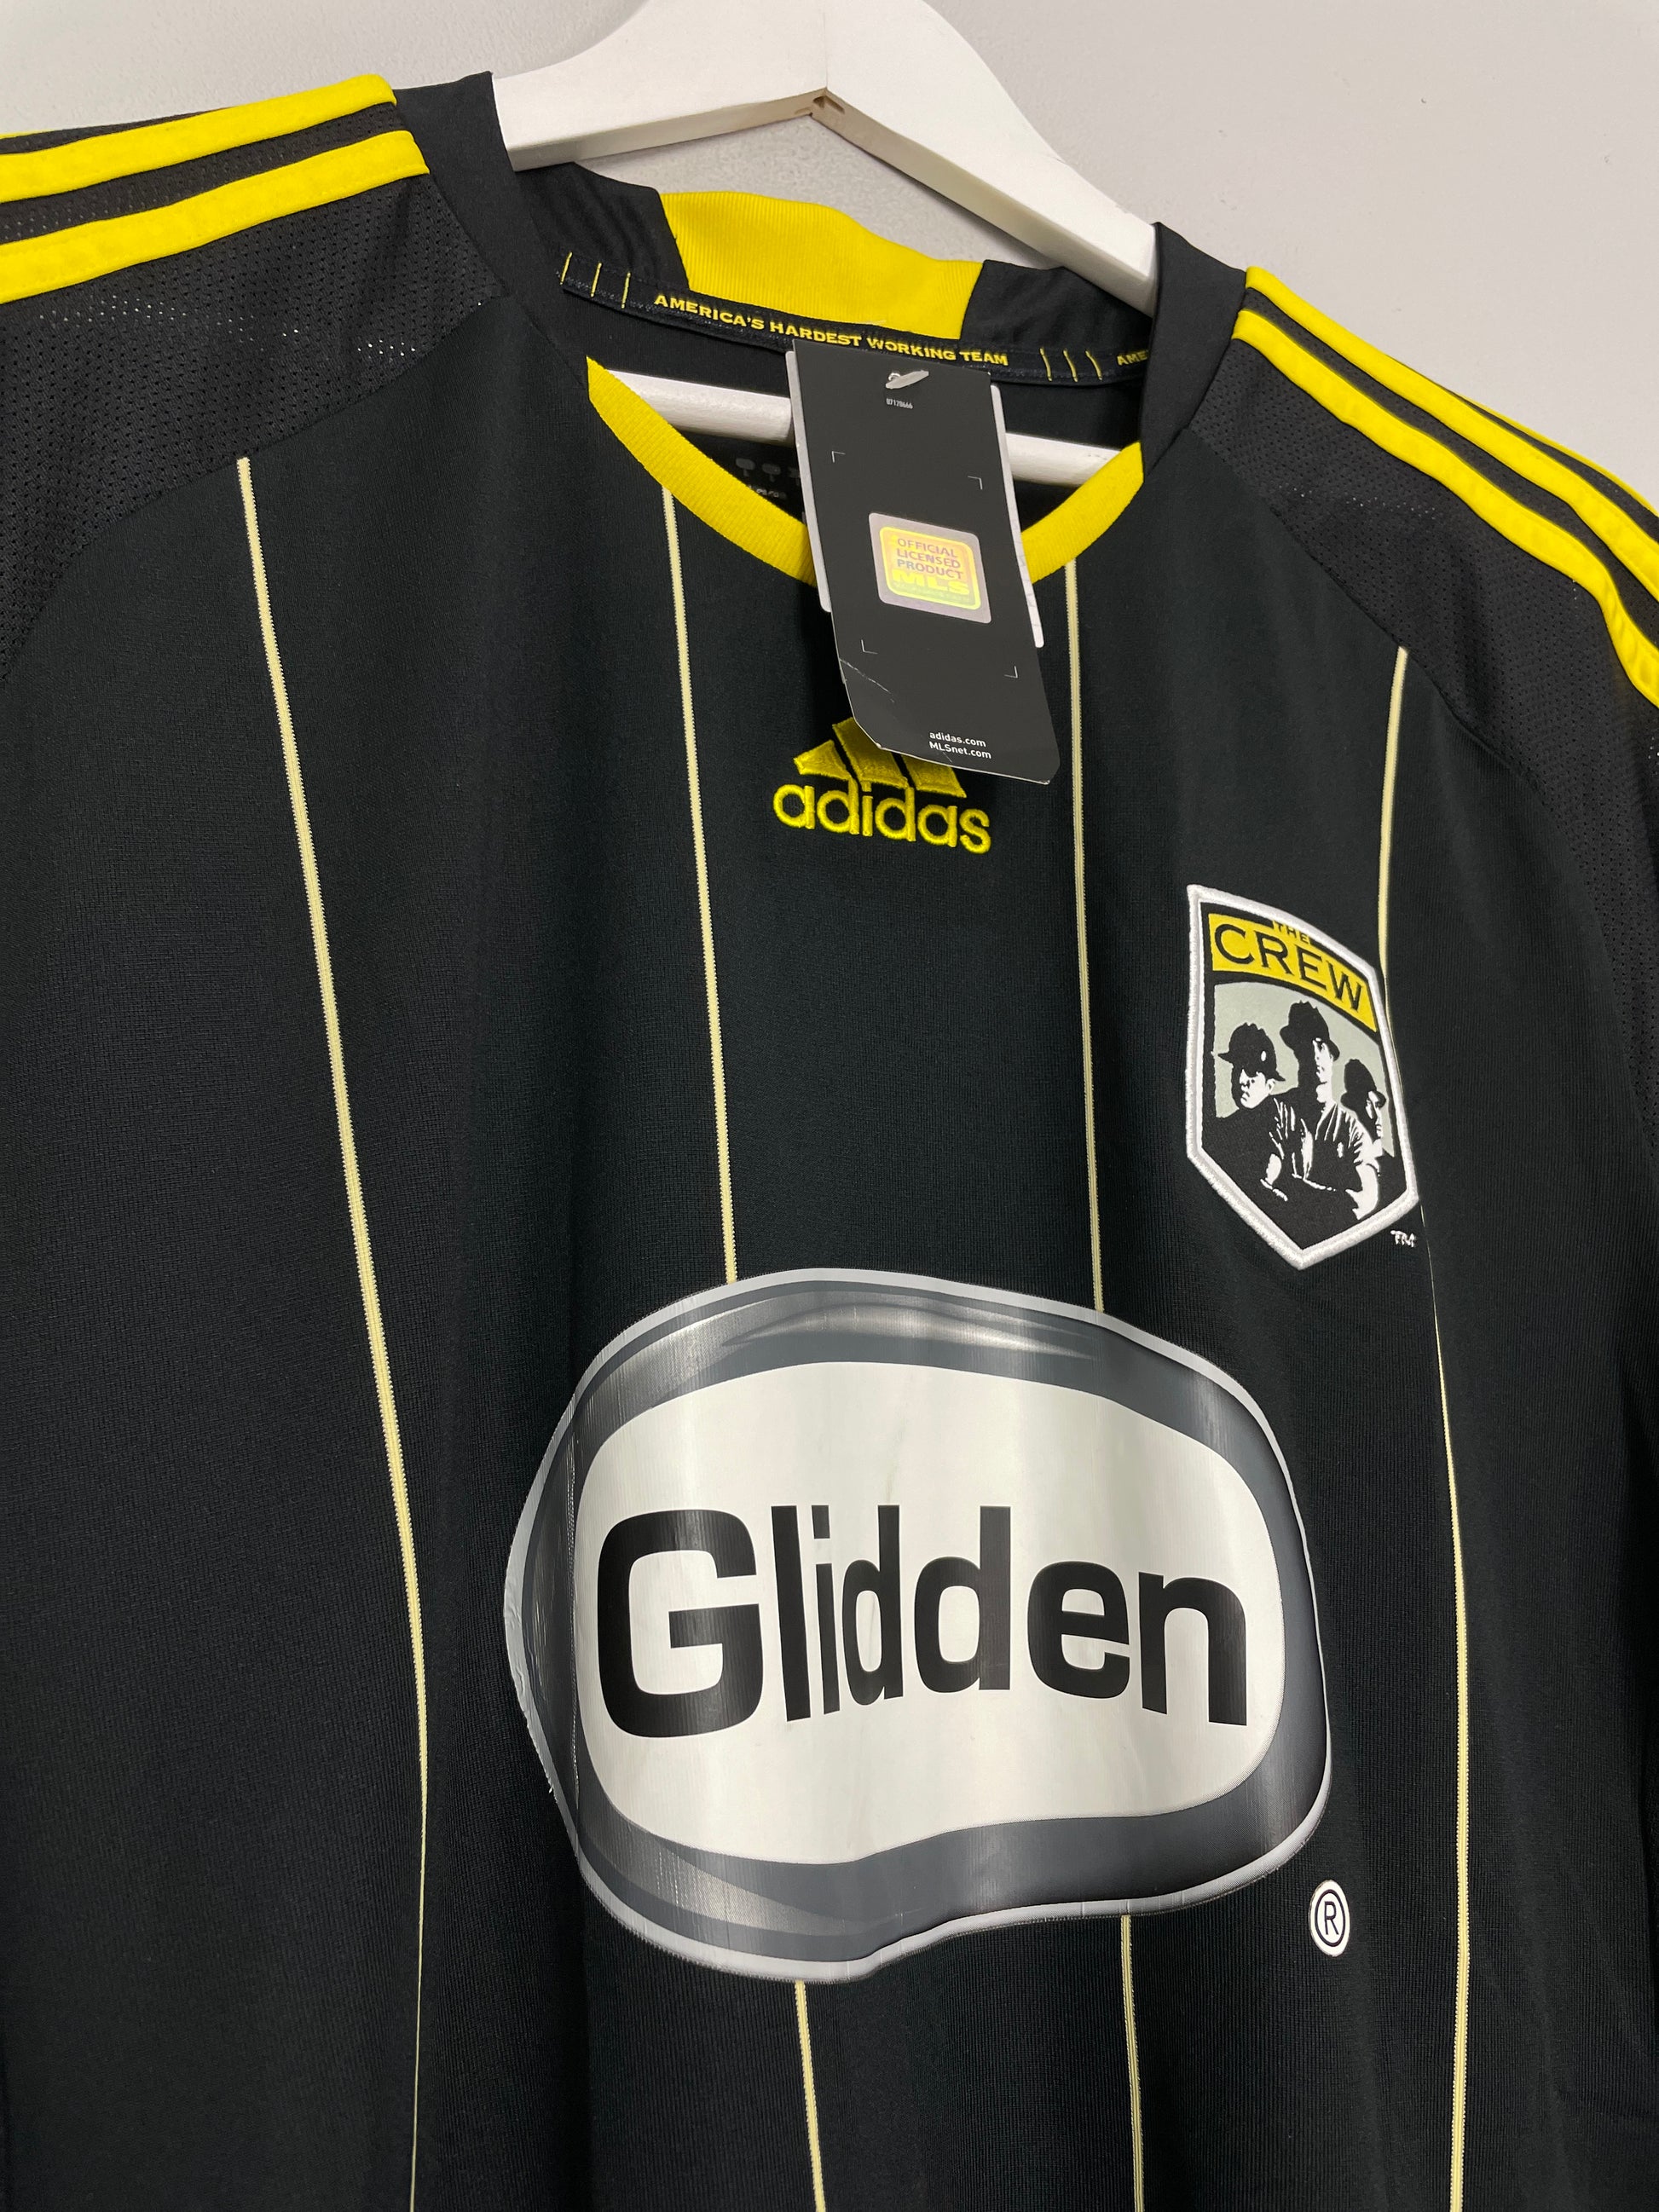 PLAYER ISSUE 2010 Adidas Columbus Crew Away Soccer Jersey Black Yellow  Large